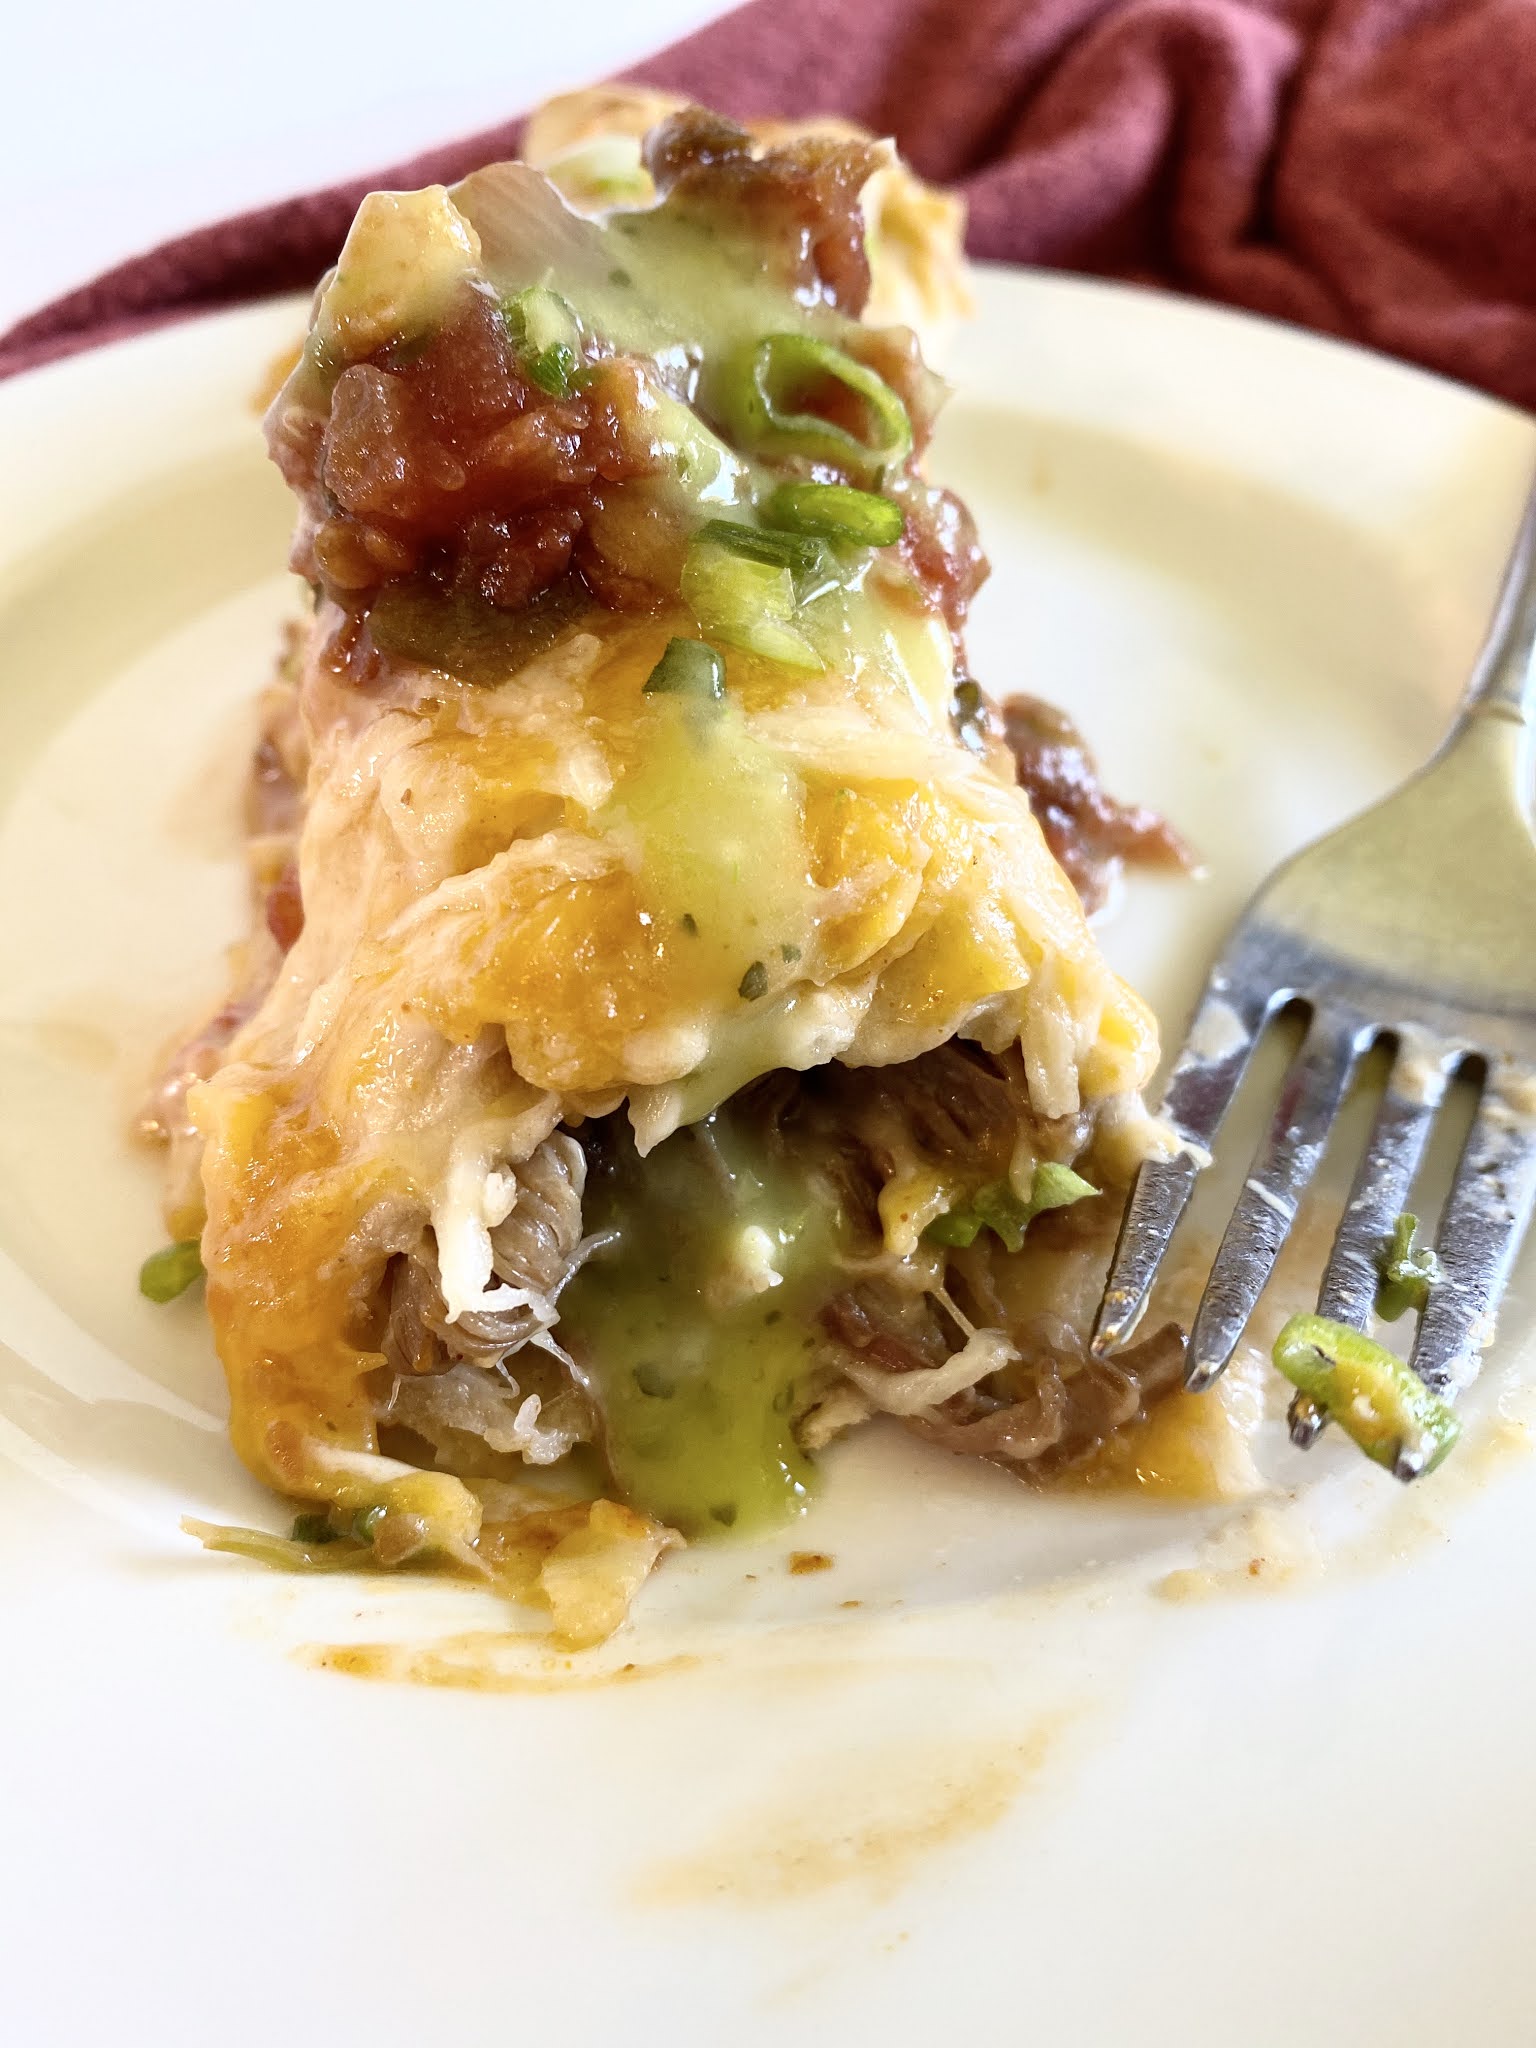 Mexican Shredded Beef Enchiladas | Ally's Sweet & Savory Eats